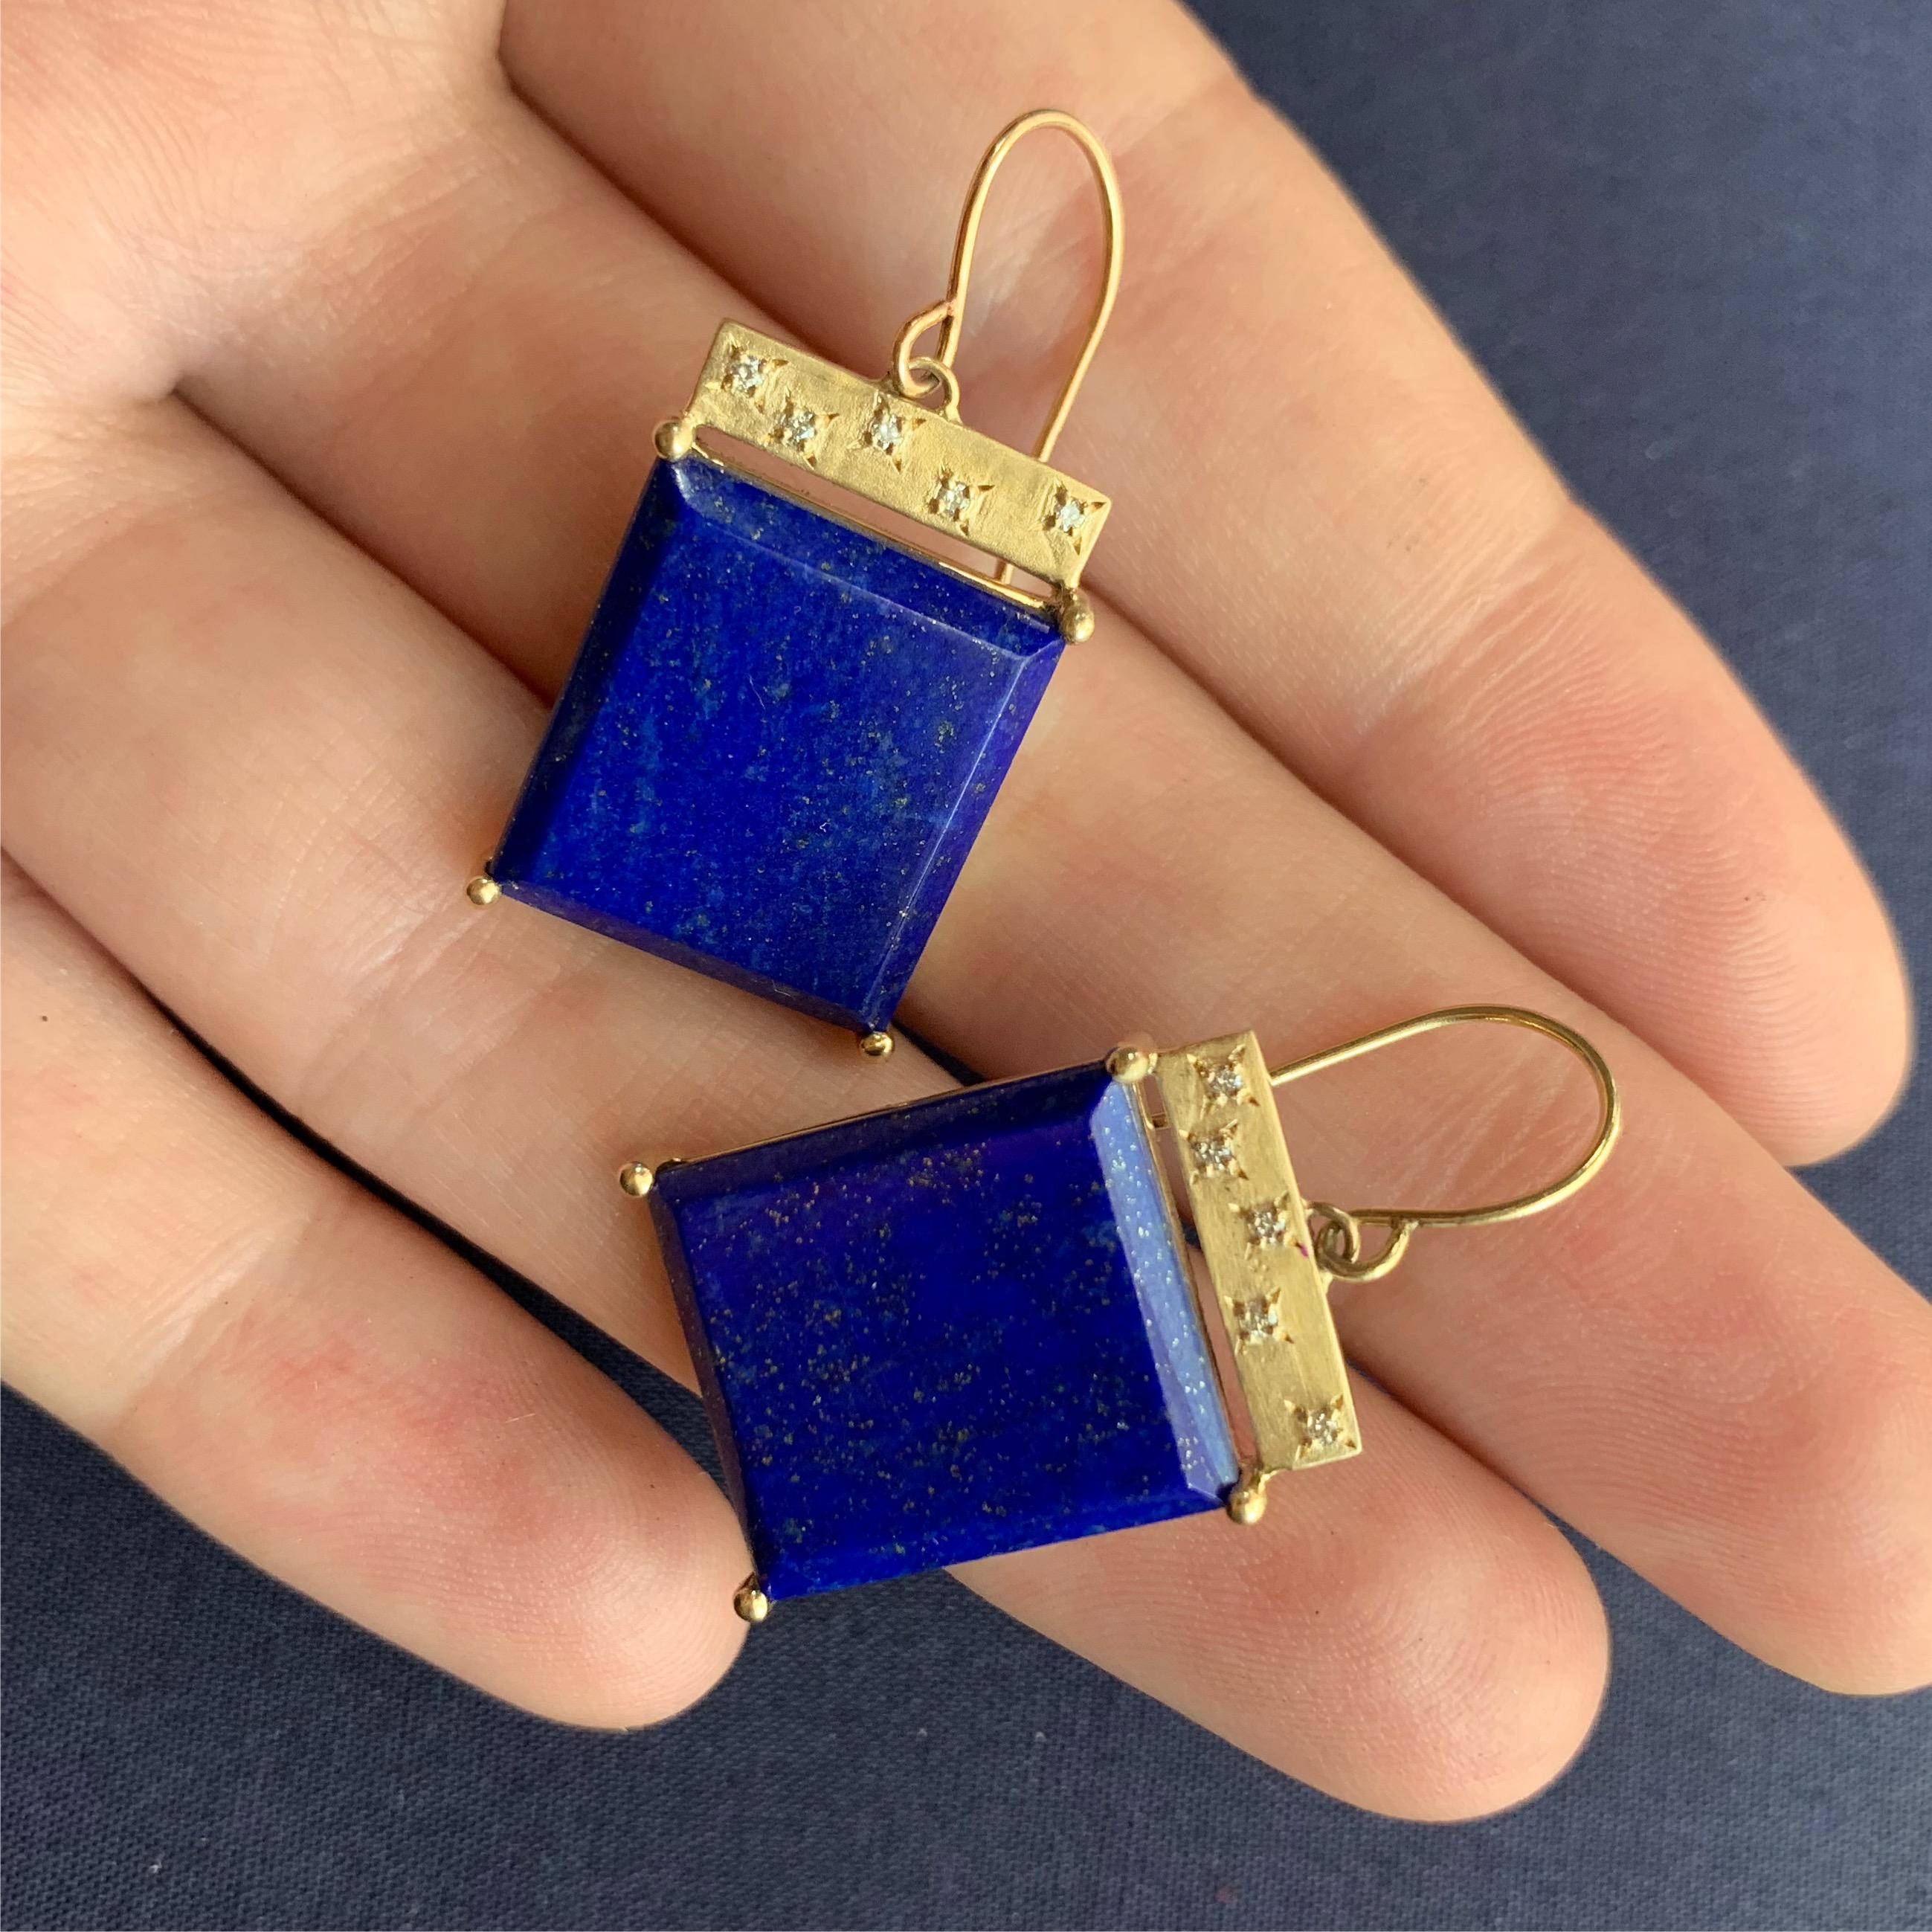 Starry night. Channel Van Gogh's skies and all the beautiful thoughts elicited by this gorgeous deep blue with flecks of gold. The perfect accent for just about everyone for every day, any occasion.

14ky gold with lapis lazuli, .10 cttw white